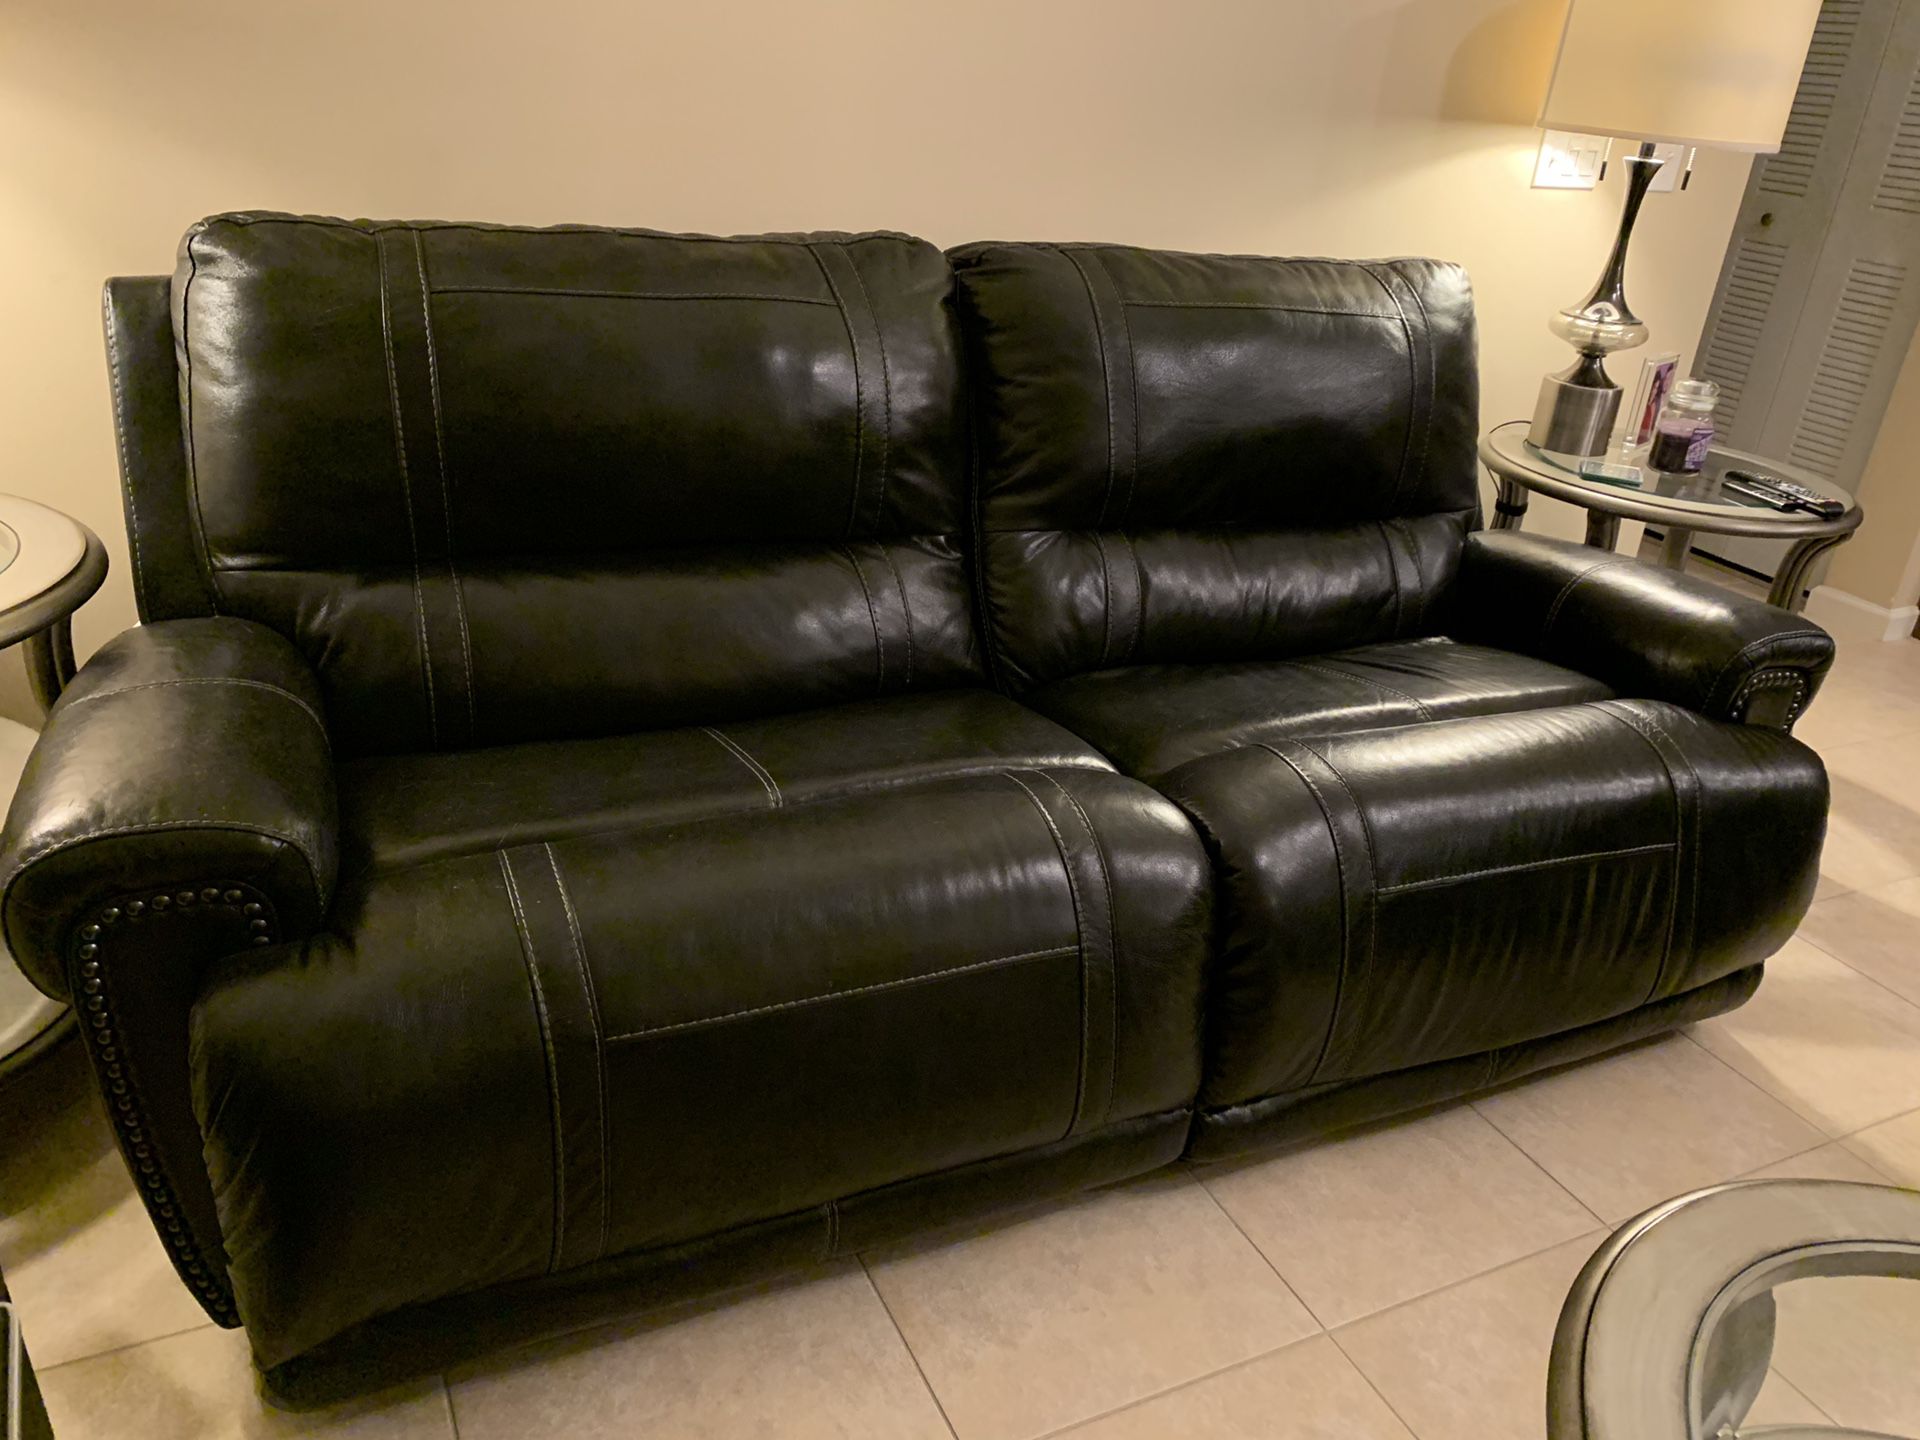 2 Reclining Black Leather Ashley Furniture sofas - SAVE TONS OF $$!